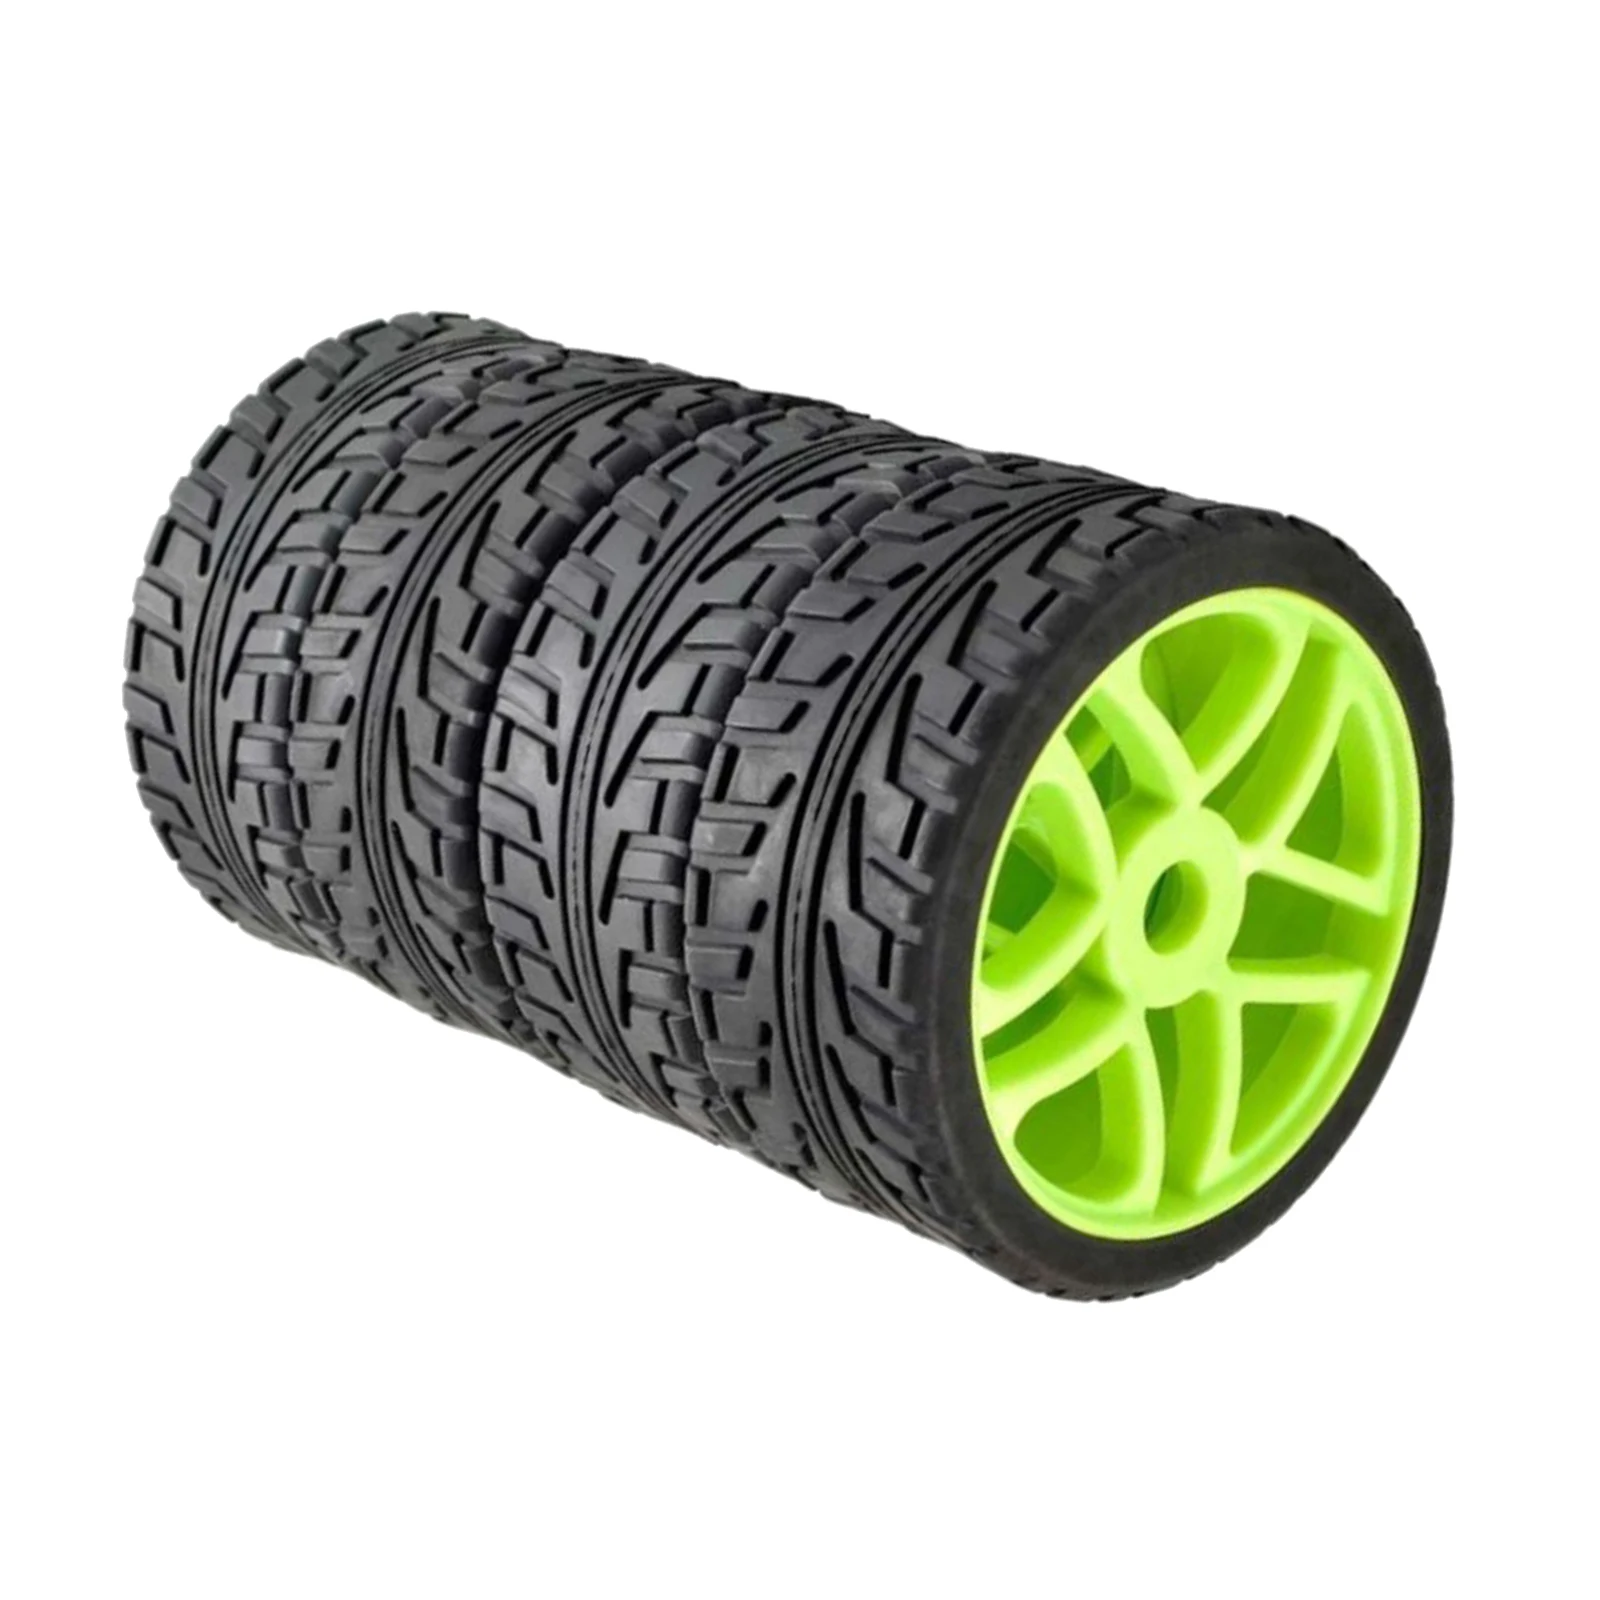 4x 1:8 RC Short Course Rubber Tire for HSP HoBao Model DIY Accessories